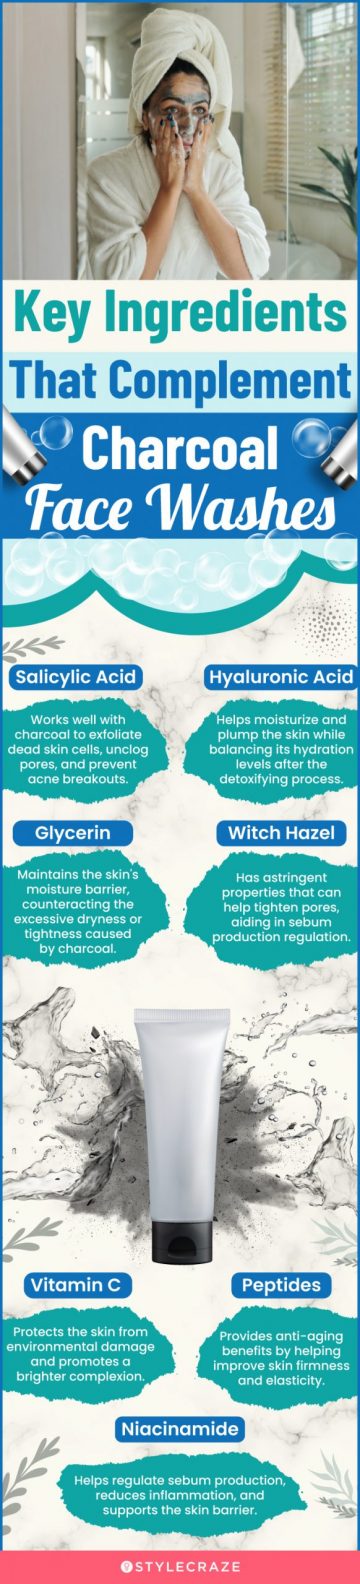 Key Ingredients That Complement Charcoal Face Washes (infographic)